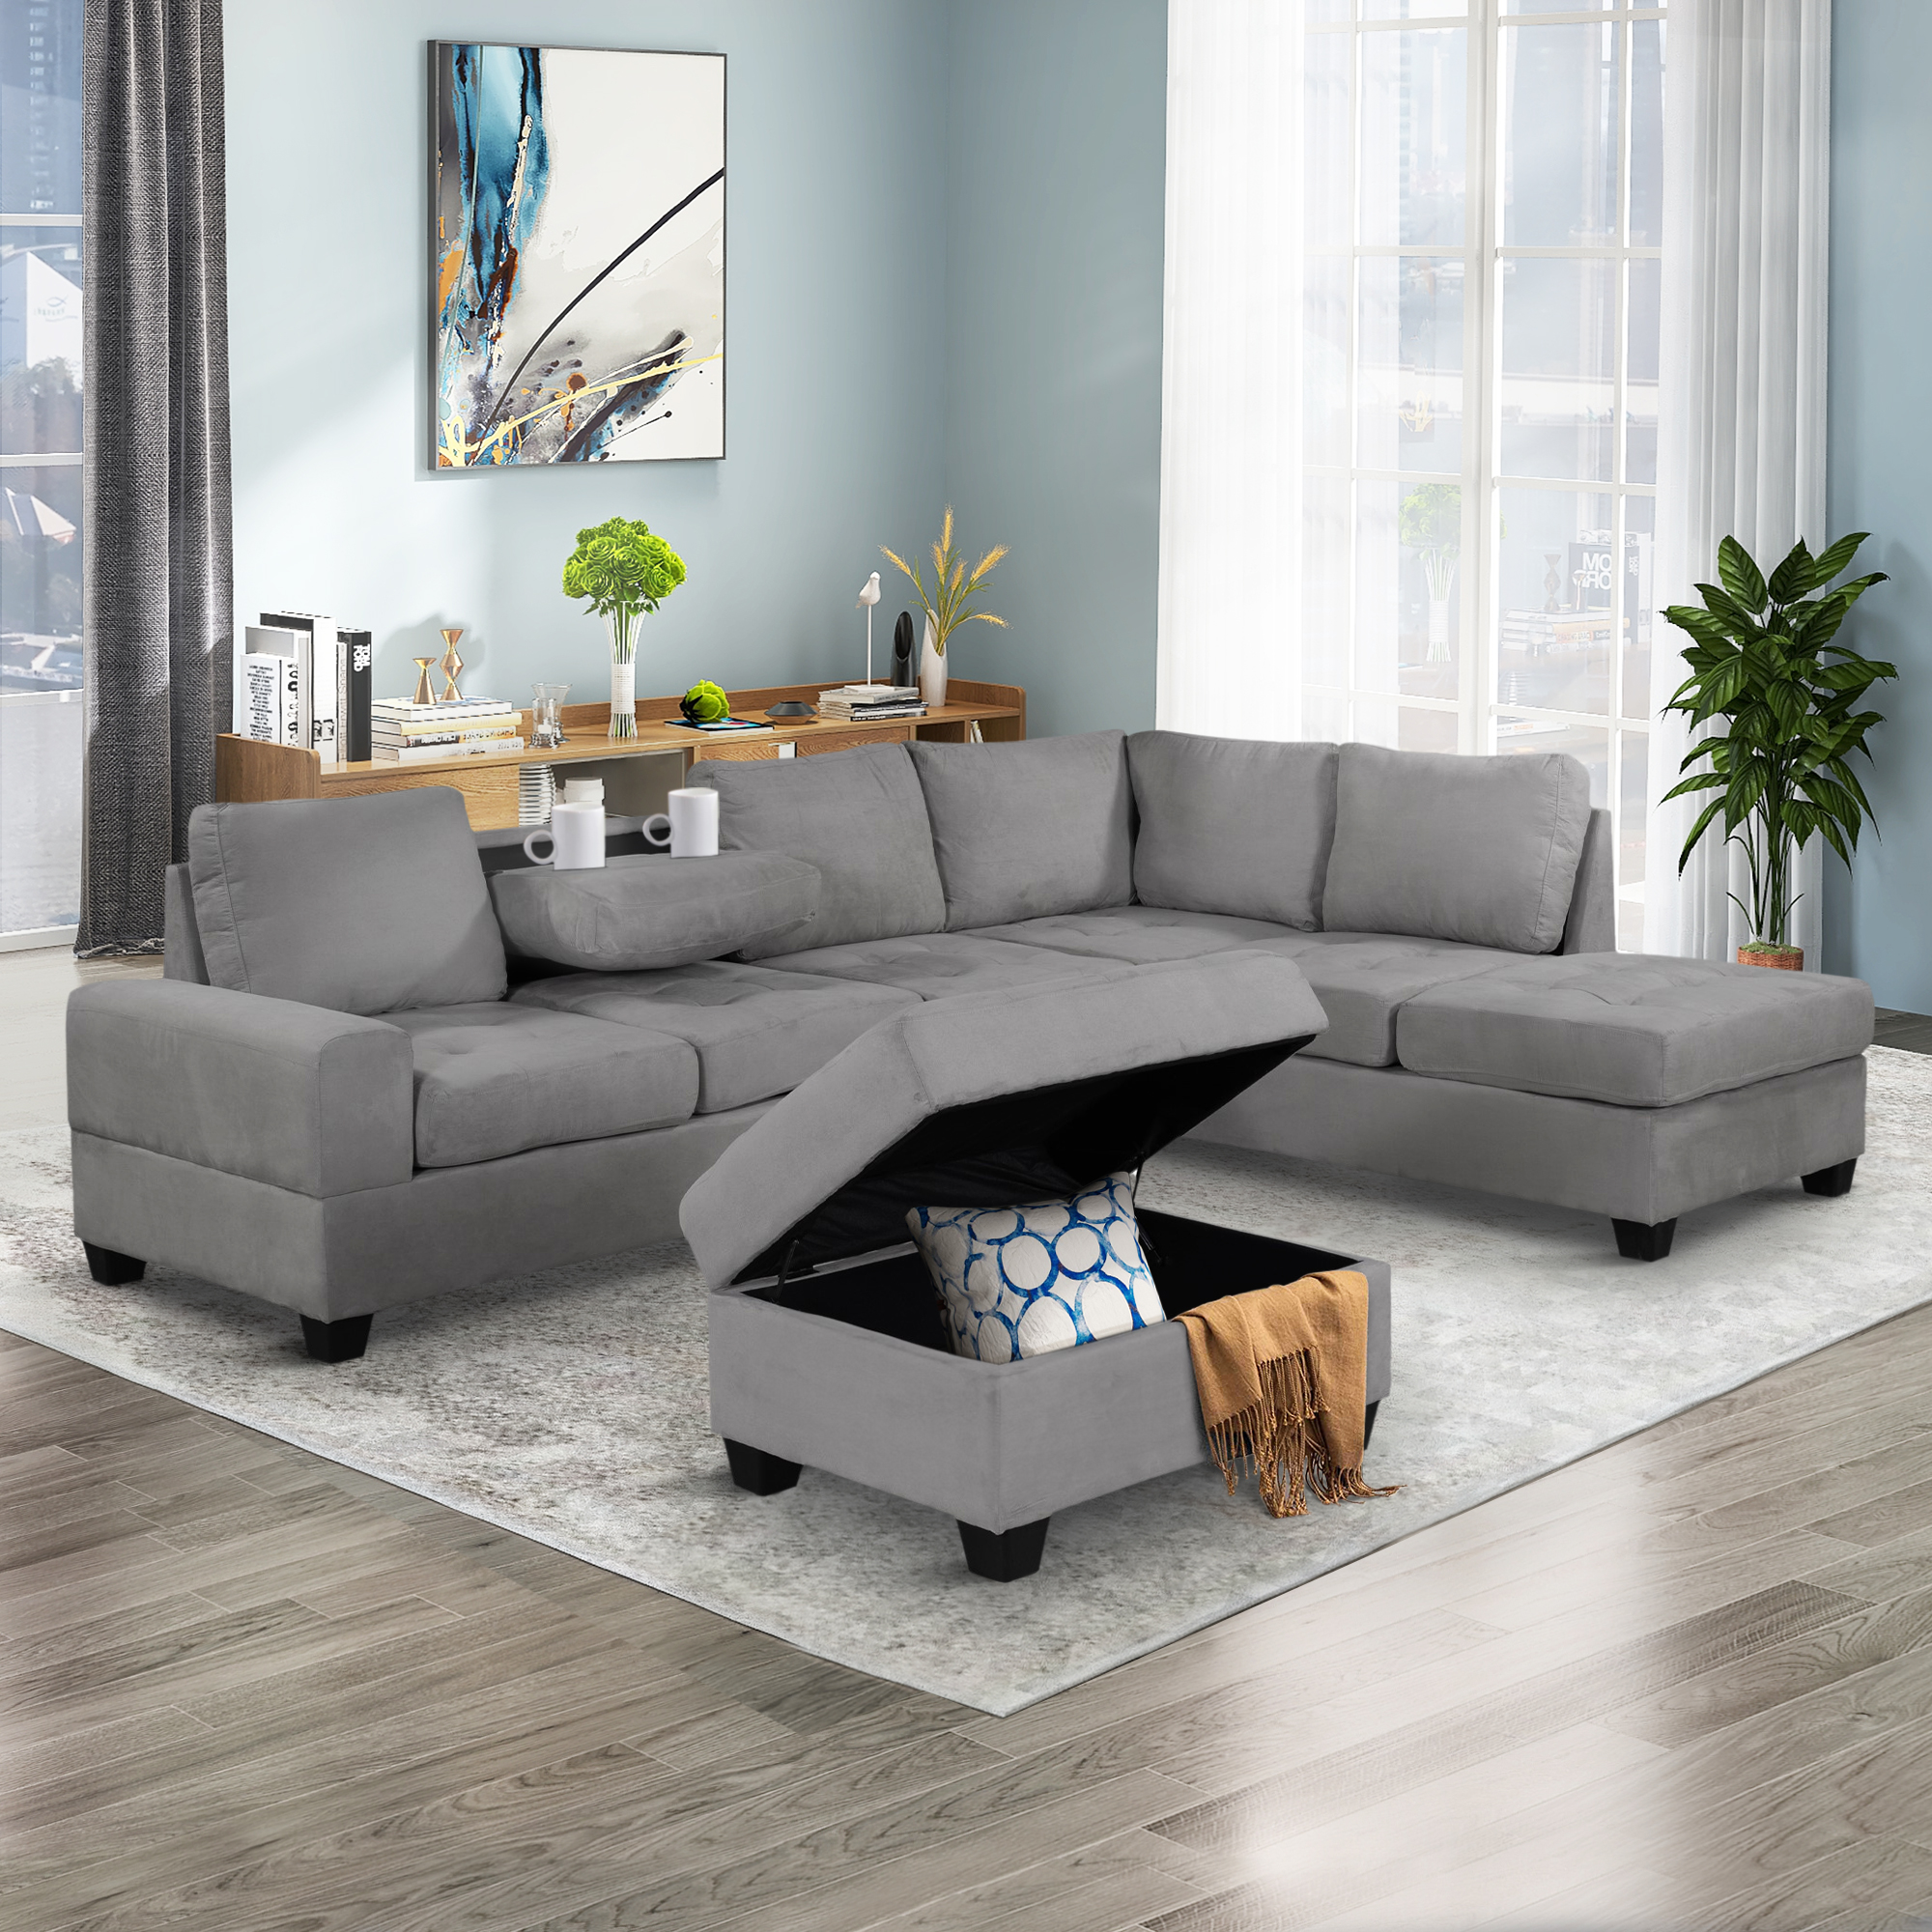 L-Shaped Couch Set With Storage Ottoman And Two Cup Holders